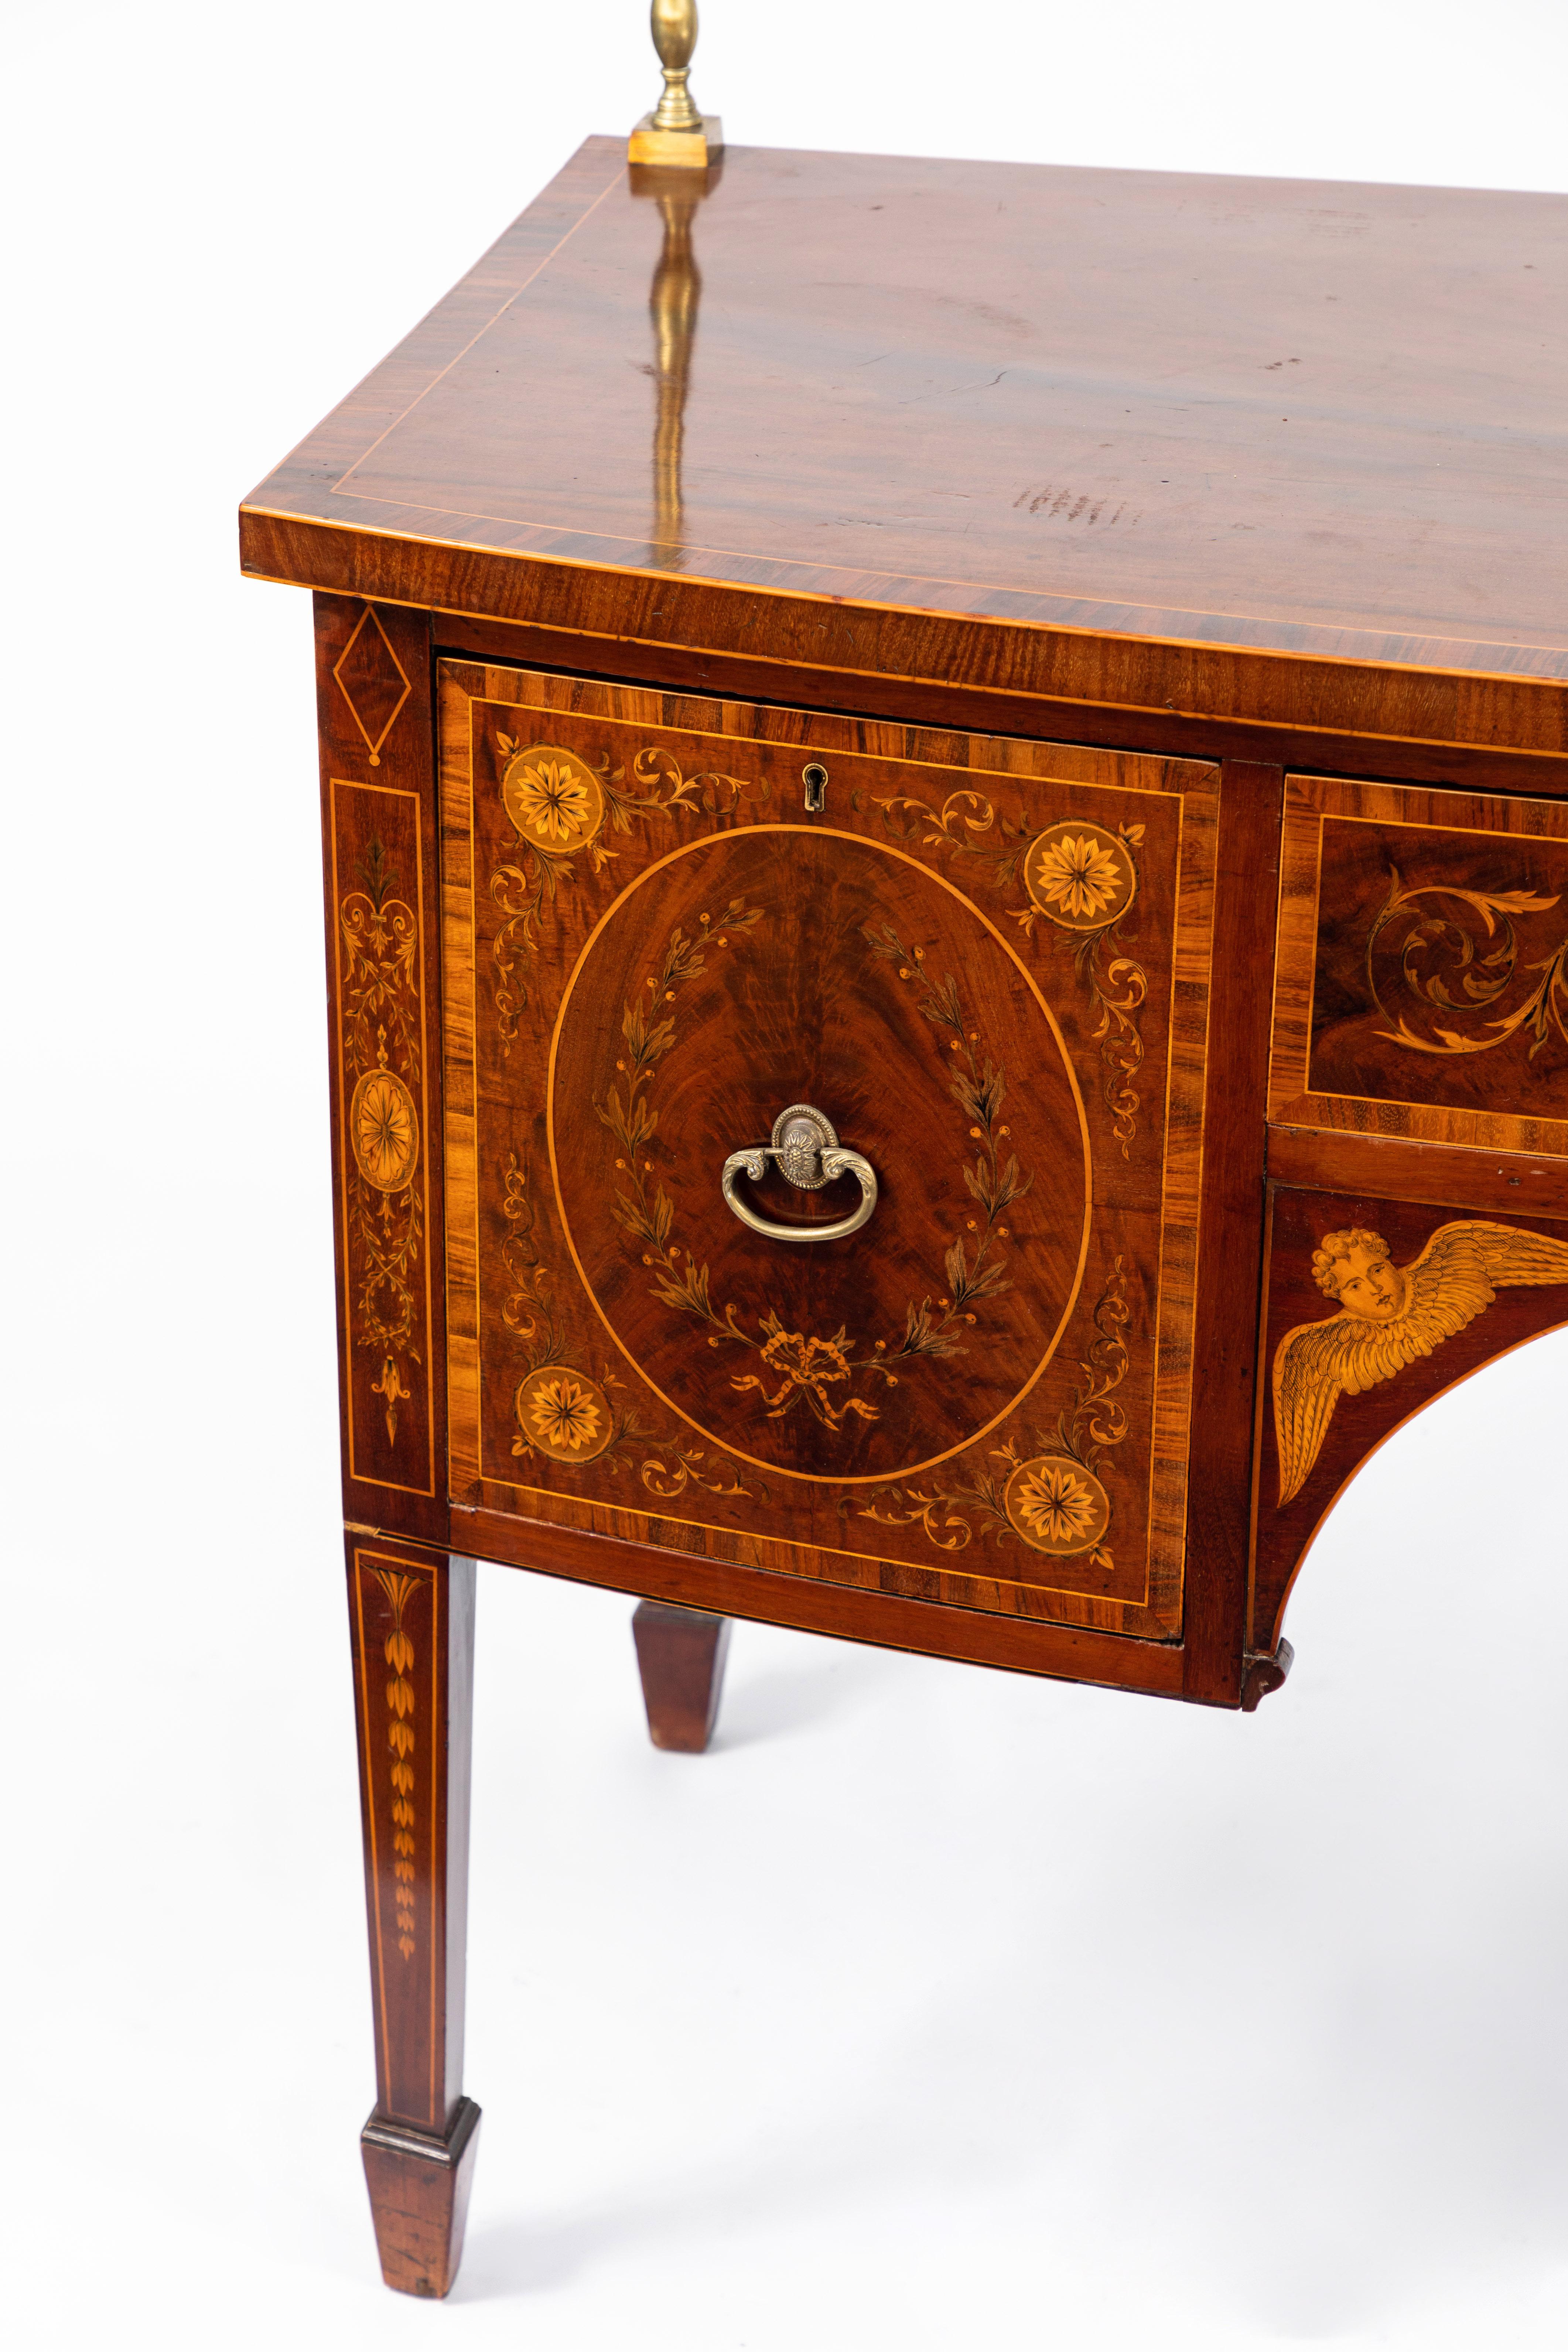 19th century English inlaid sideboard with very fine details of cherubs, rosettes etc. Original brass. Mahogany with satinwood inlay. Signed by the maker, London.